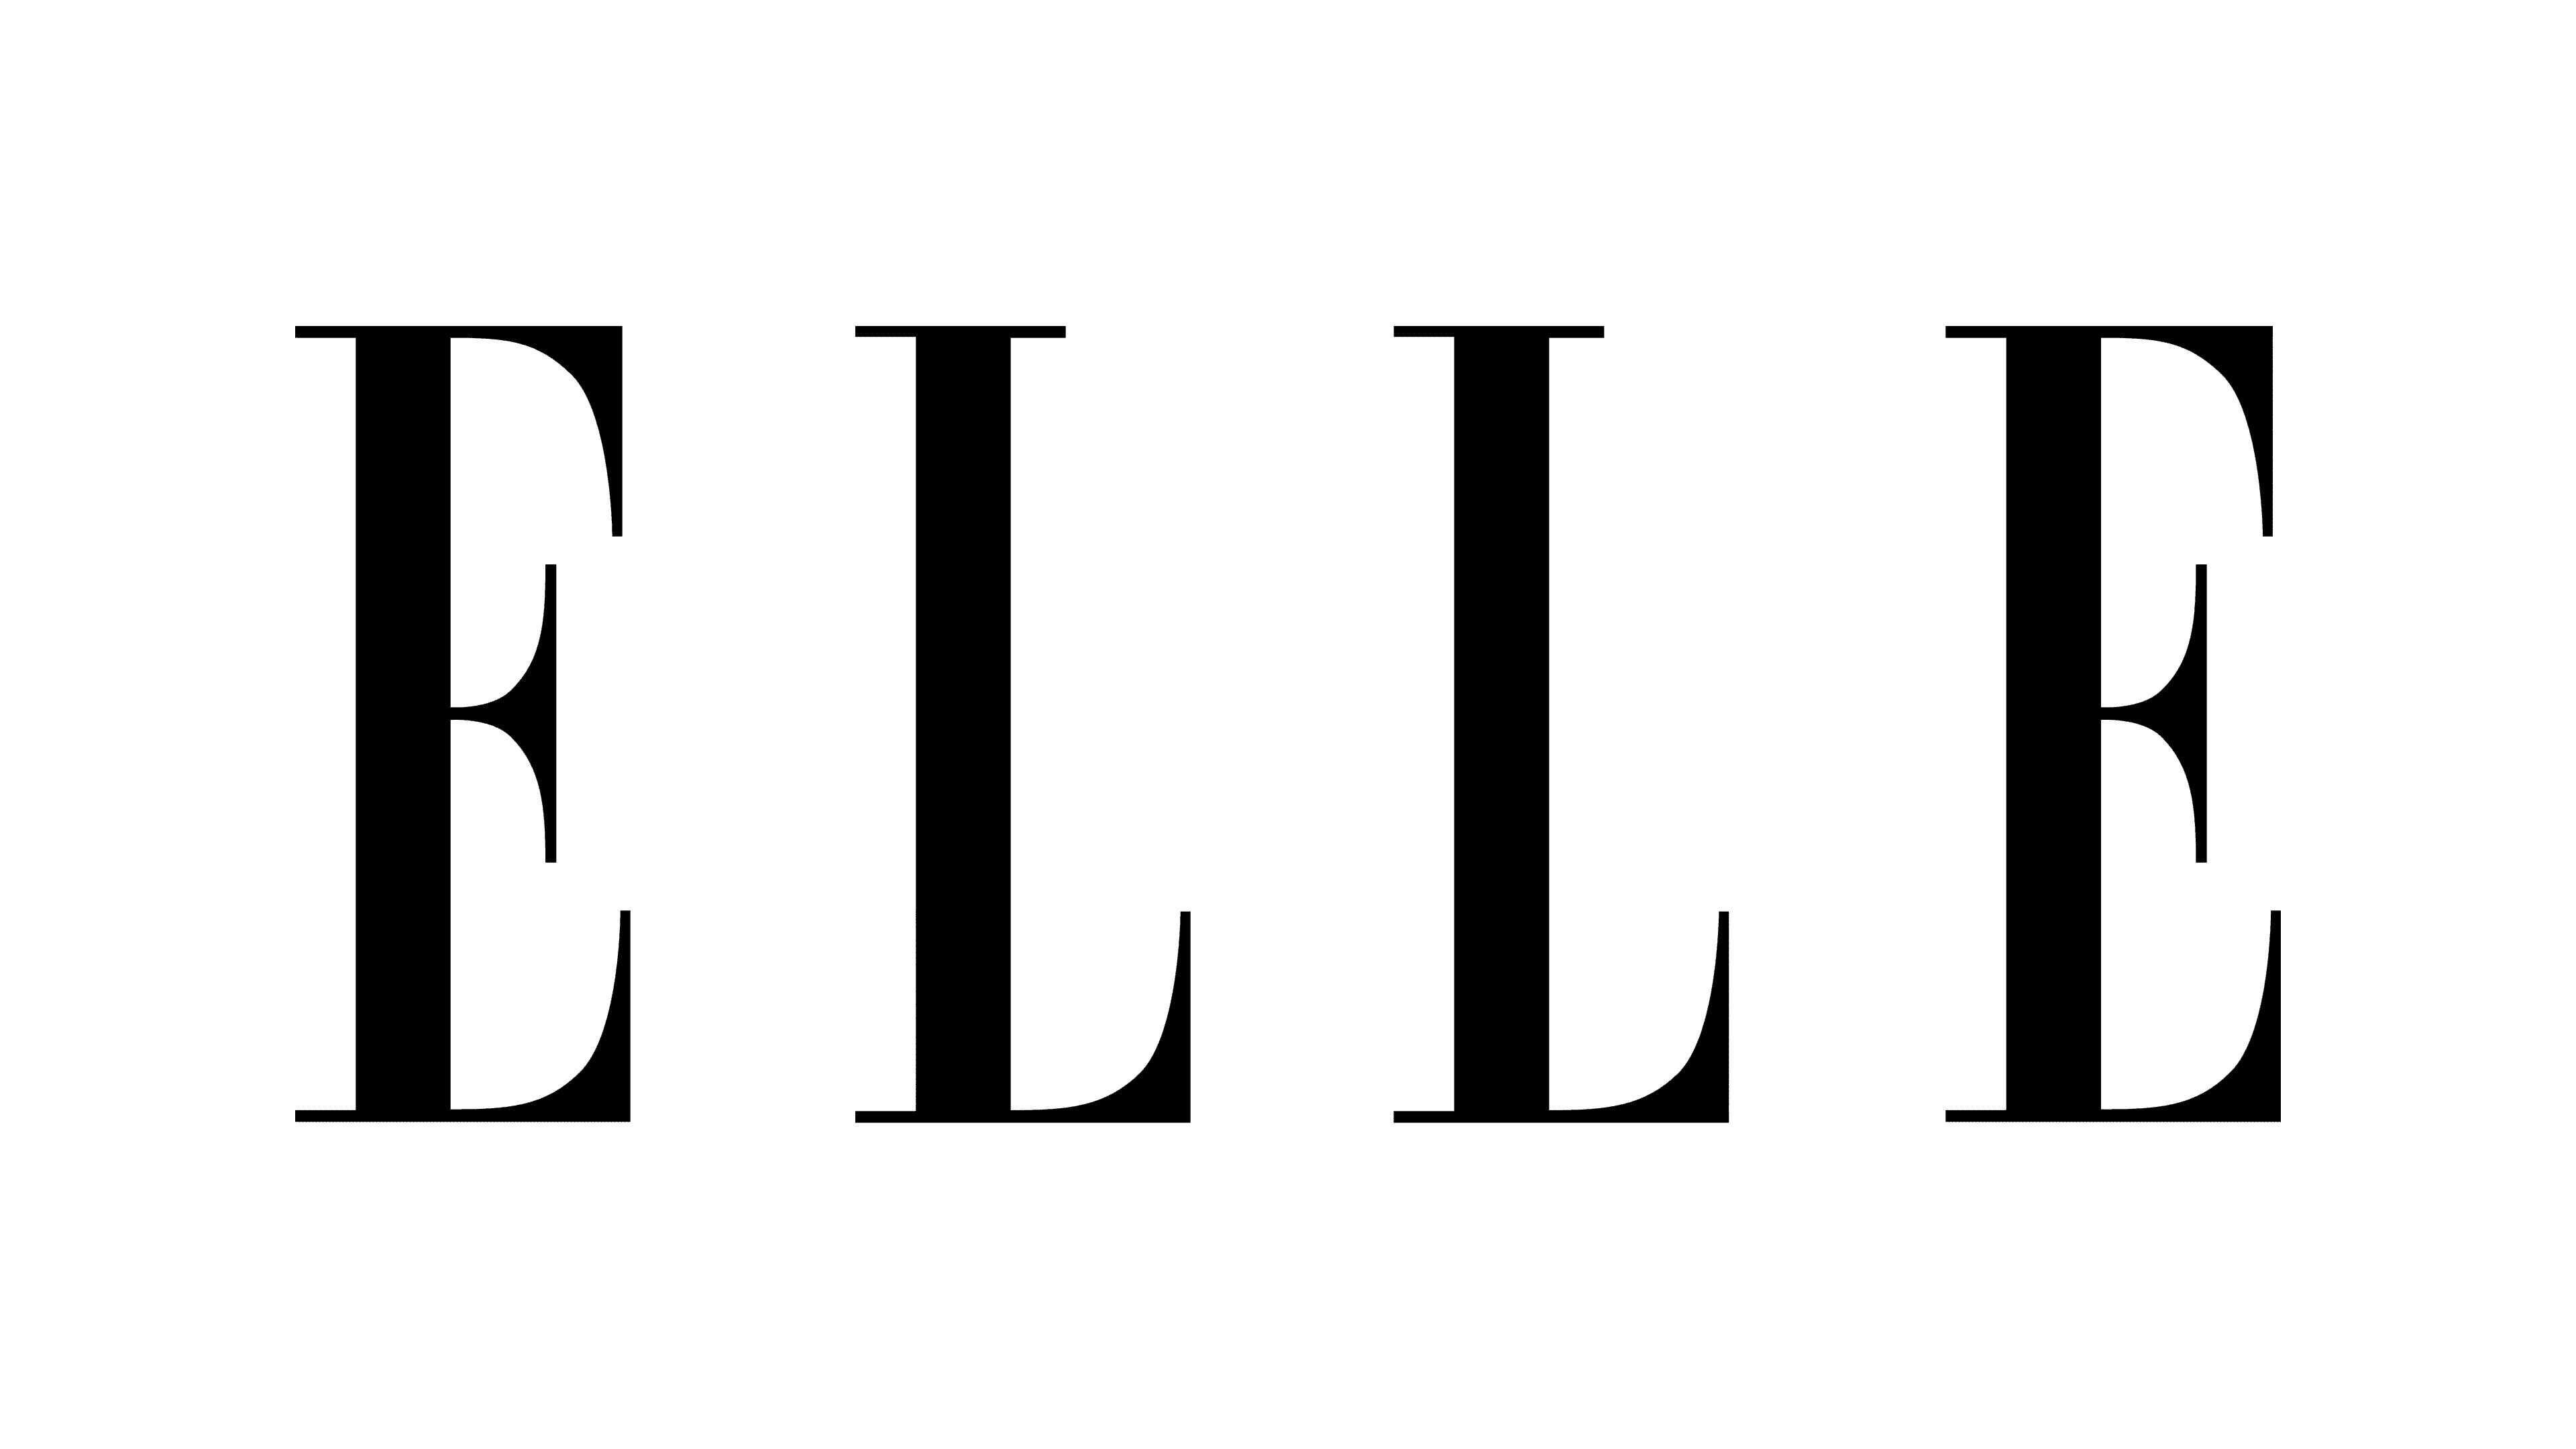 The elle logo on a green background.